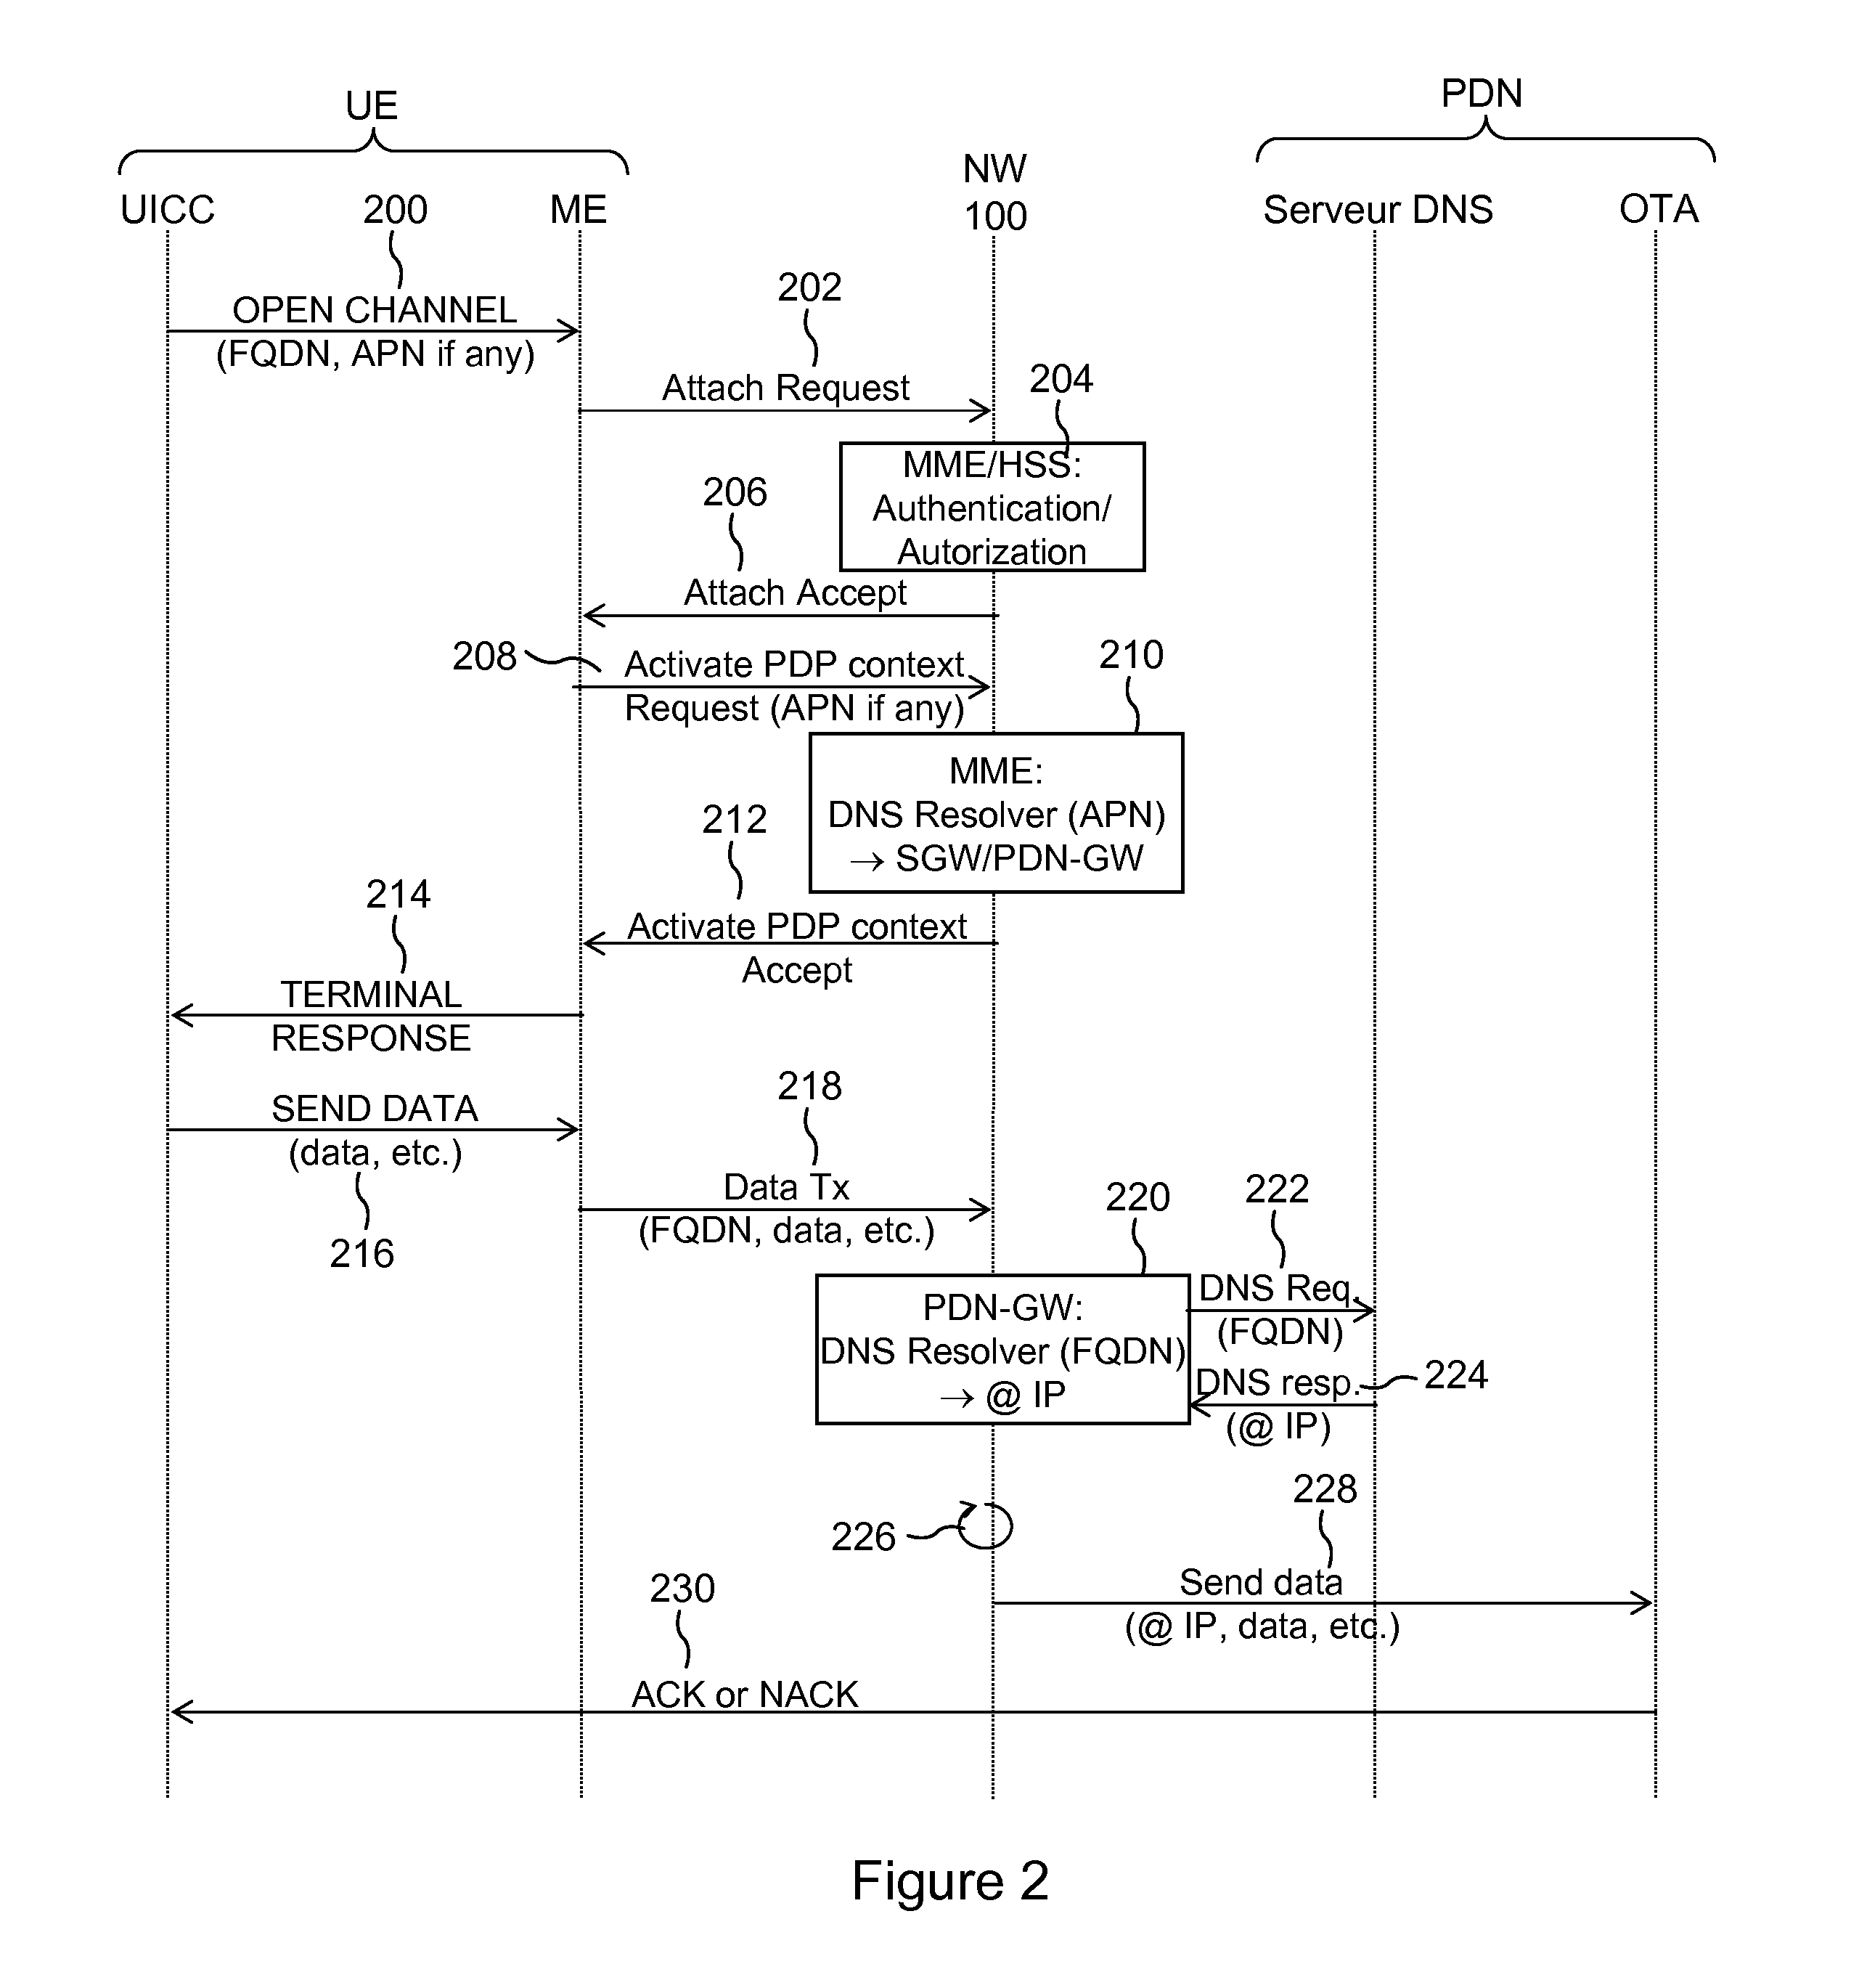 Method of establishing an IP connection in a mobile network and various corresponding equipment items